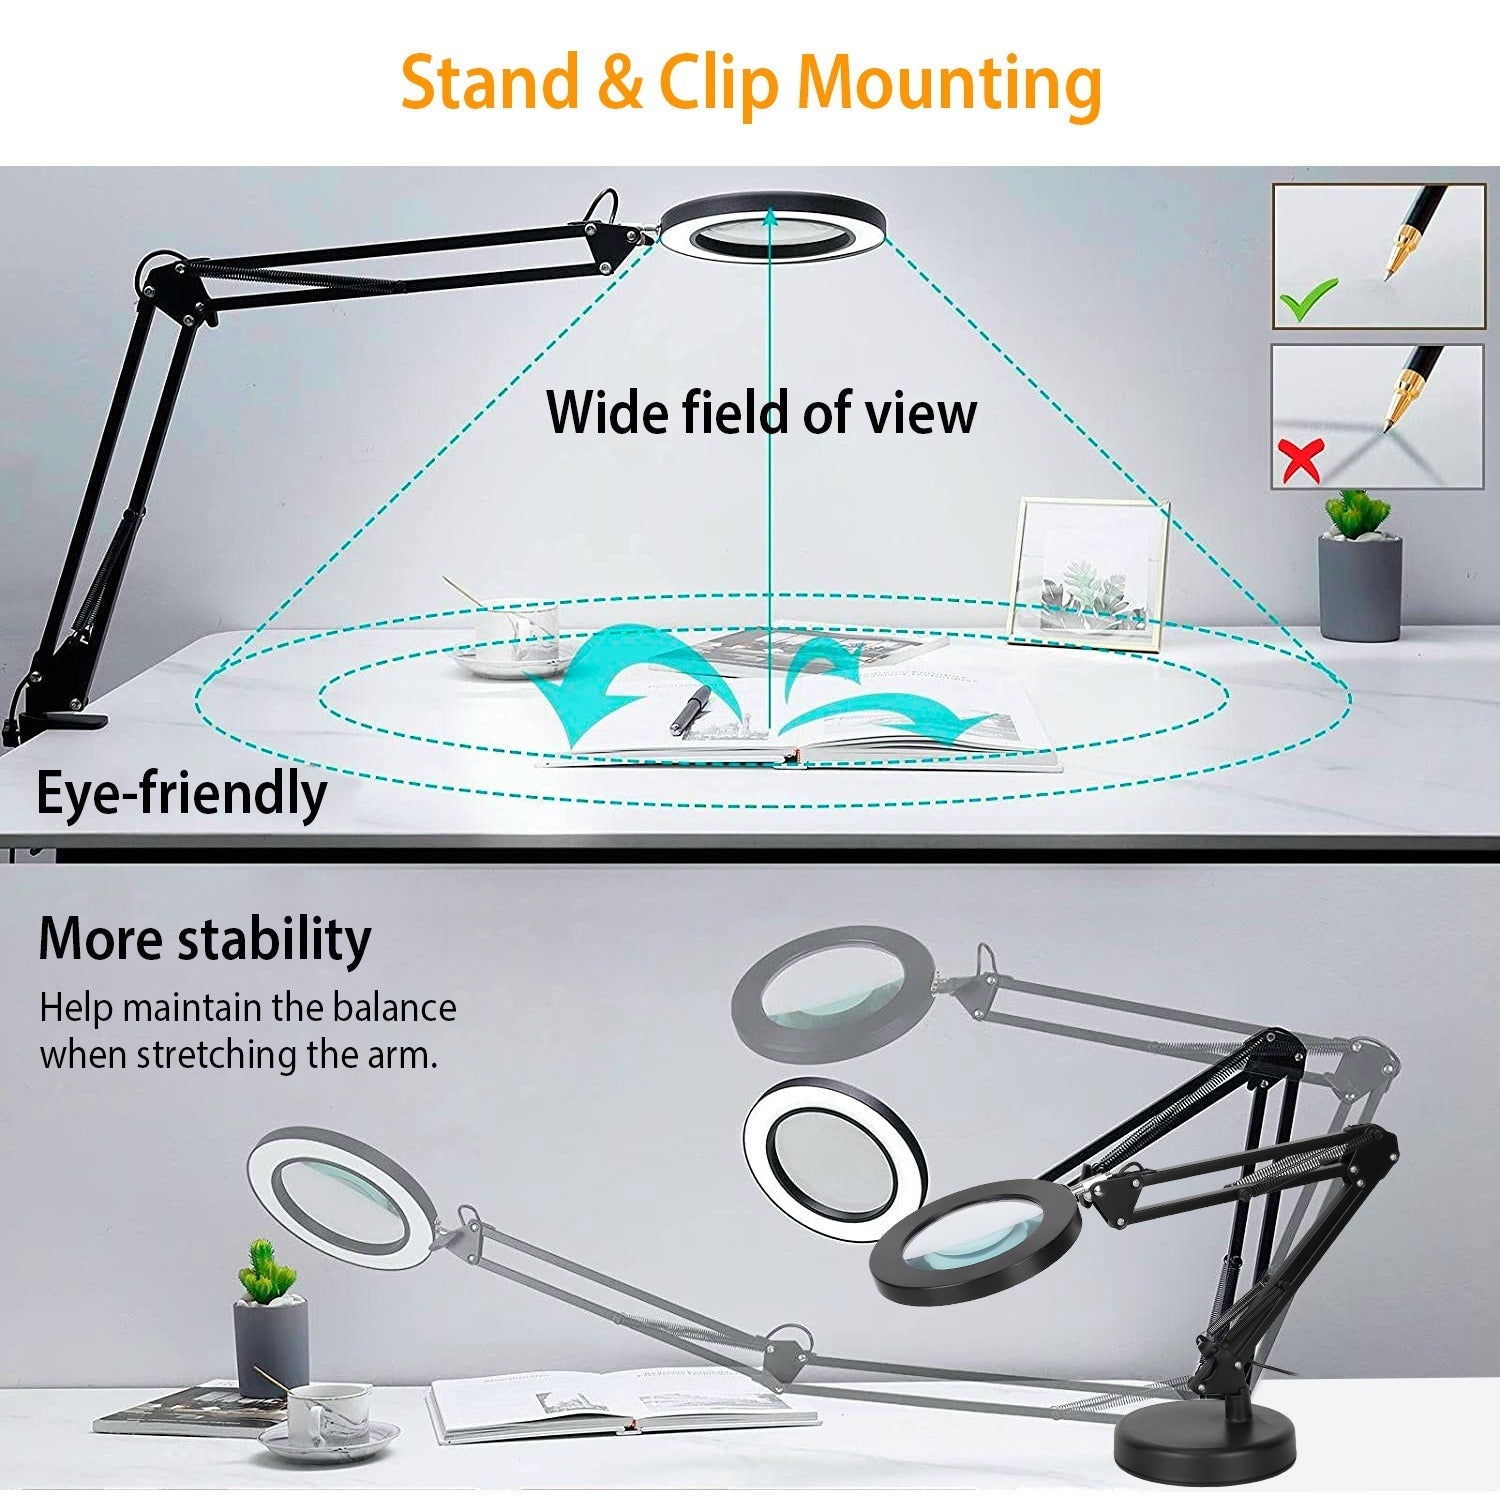 iMountek 2-in-1 Precision LED Magnifier Lamp: Clarity Meets Brightness